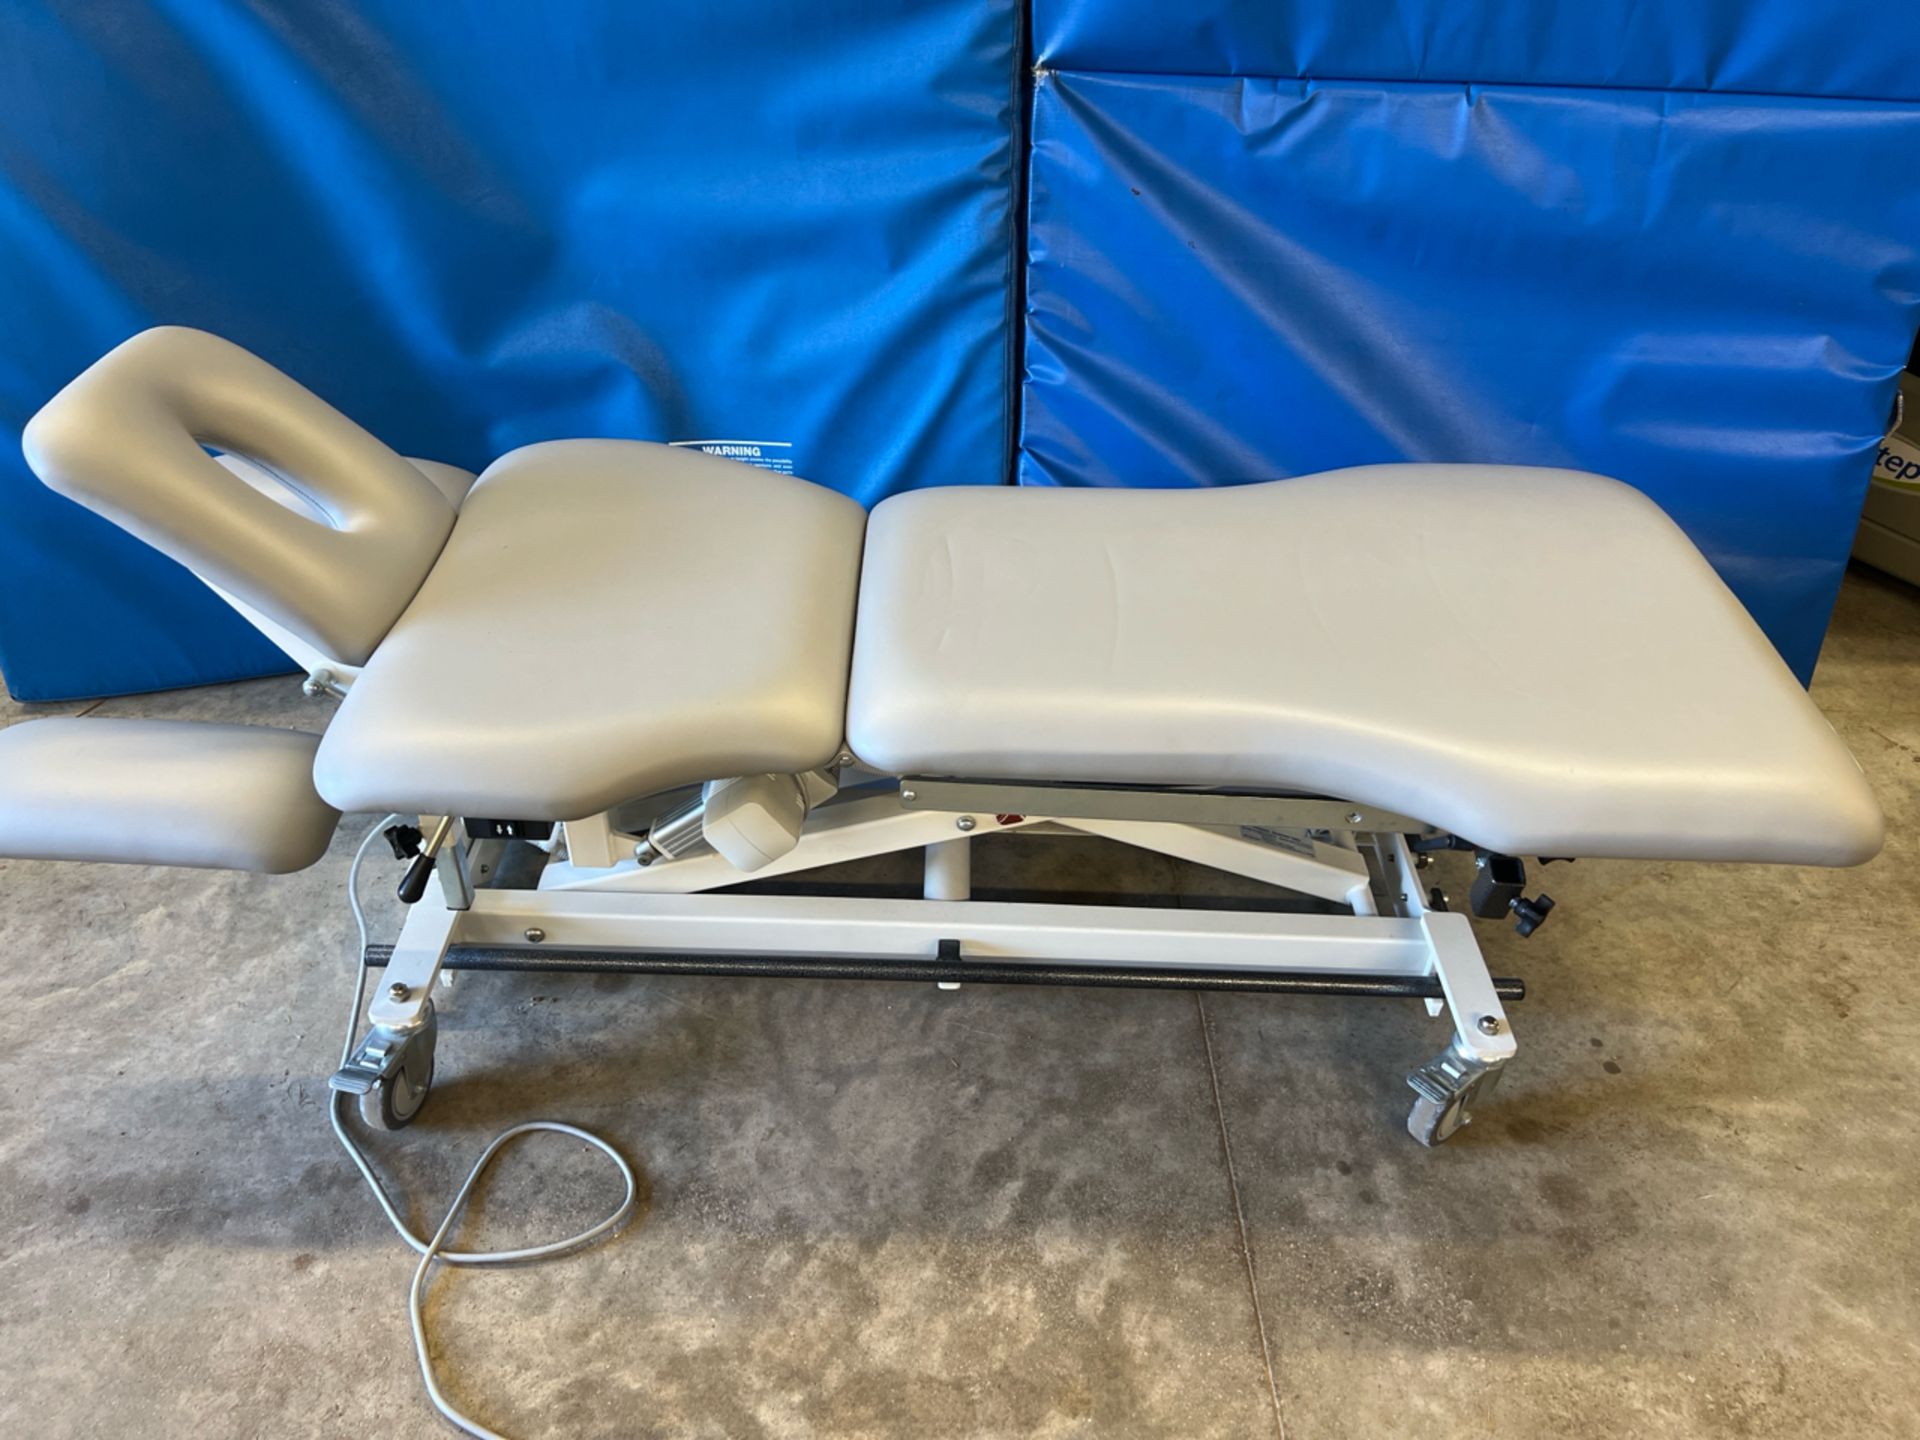 ARMEDICA 81551597 POWER THERAPY TABLE WITH INTEGRATED FOOT CONTROL